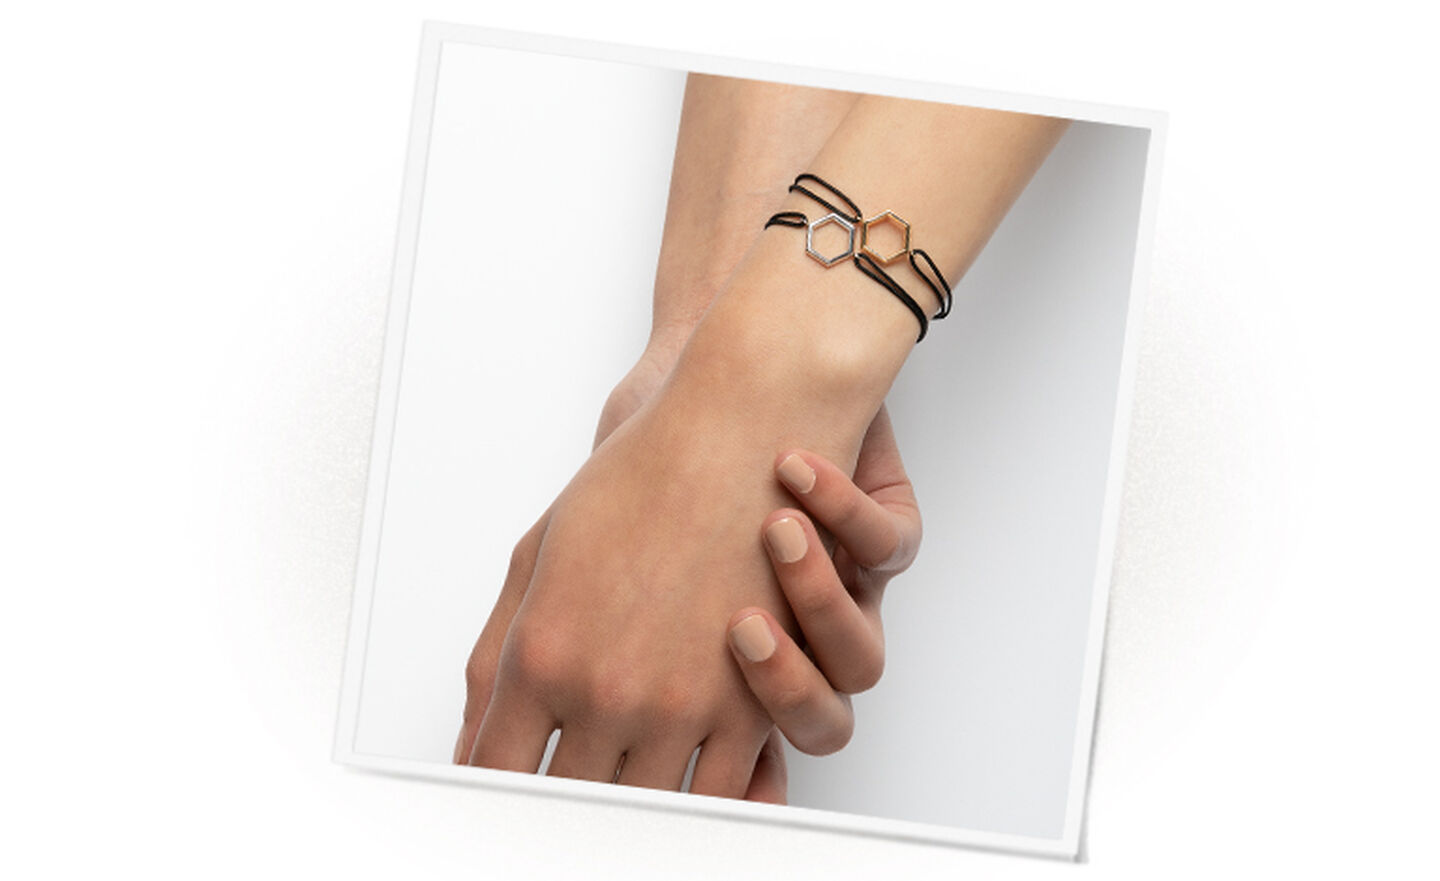 Holding hands wearing two silver and gold hexagonal pendant bracelets